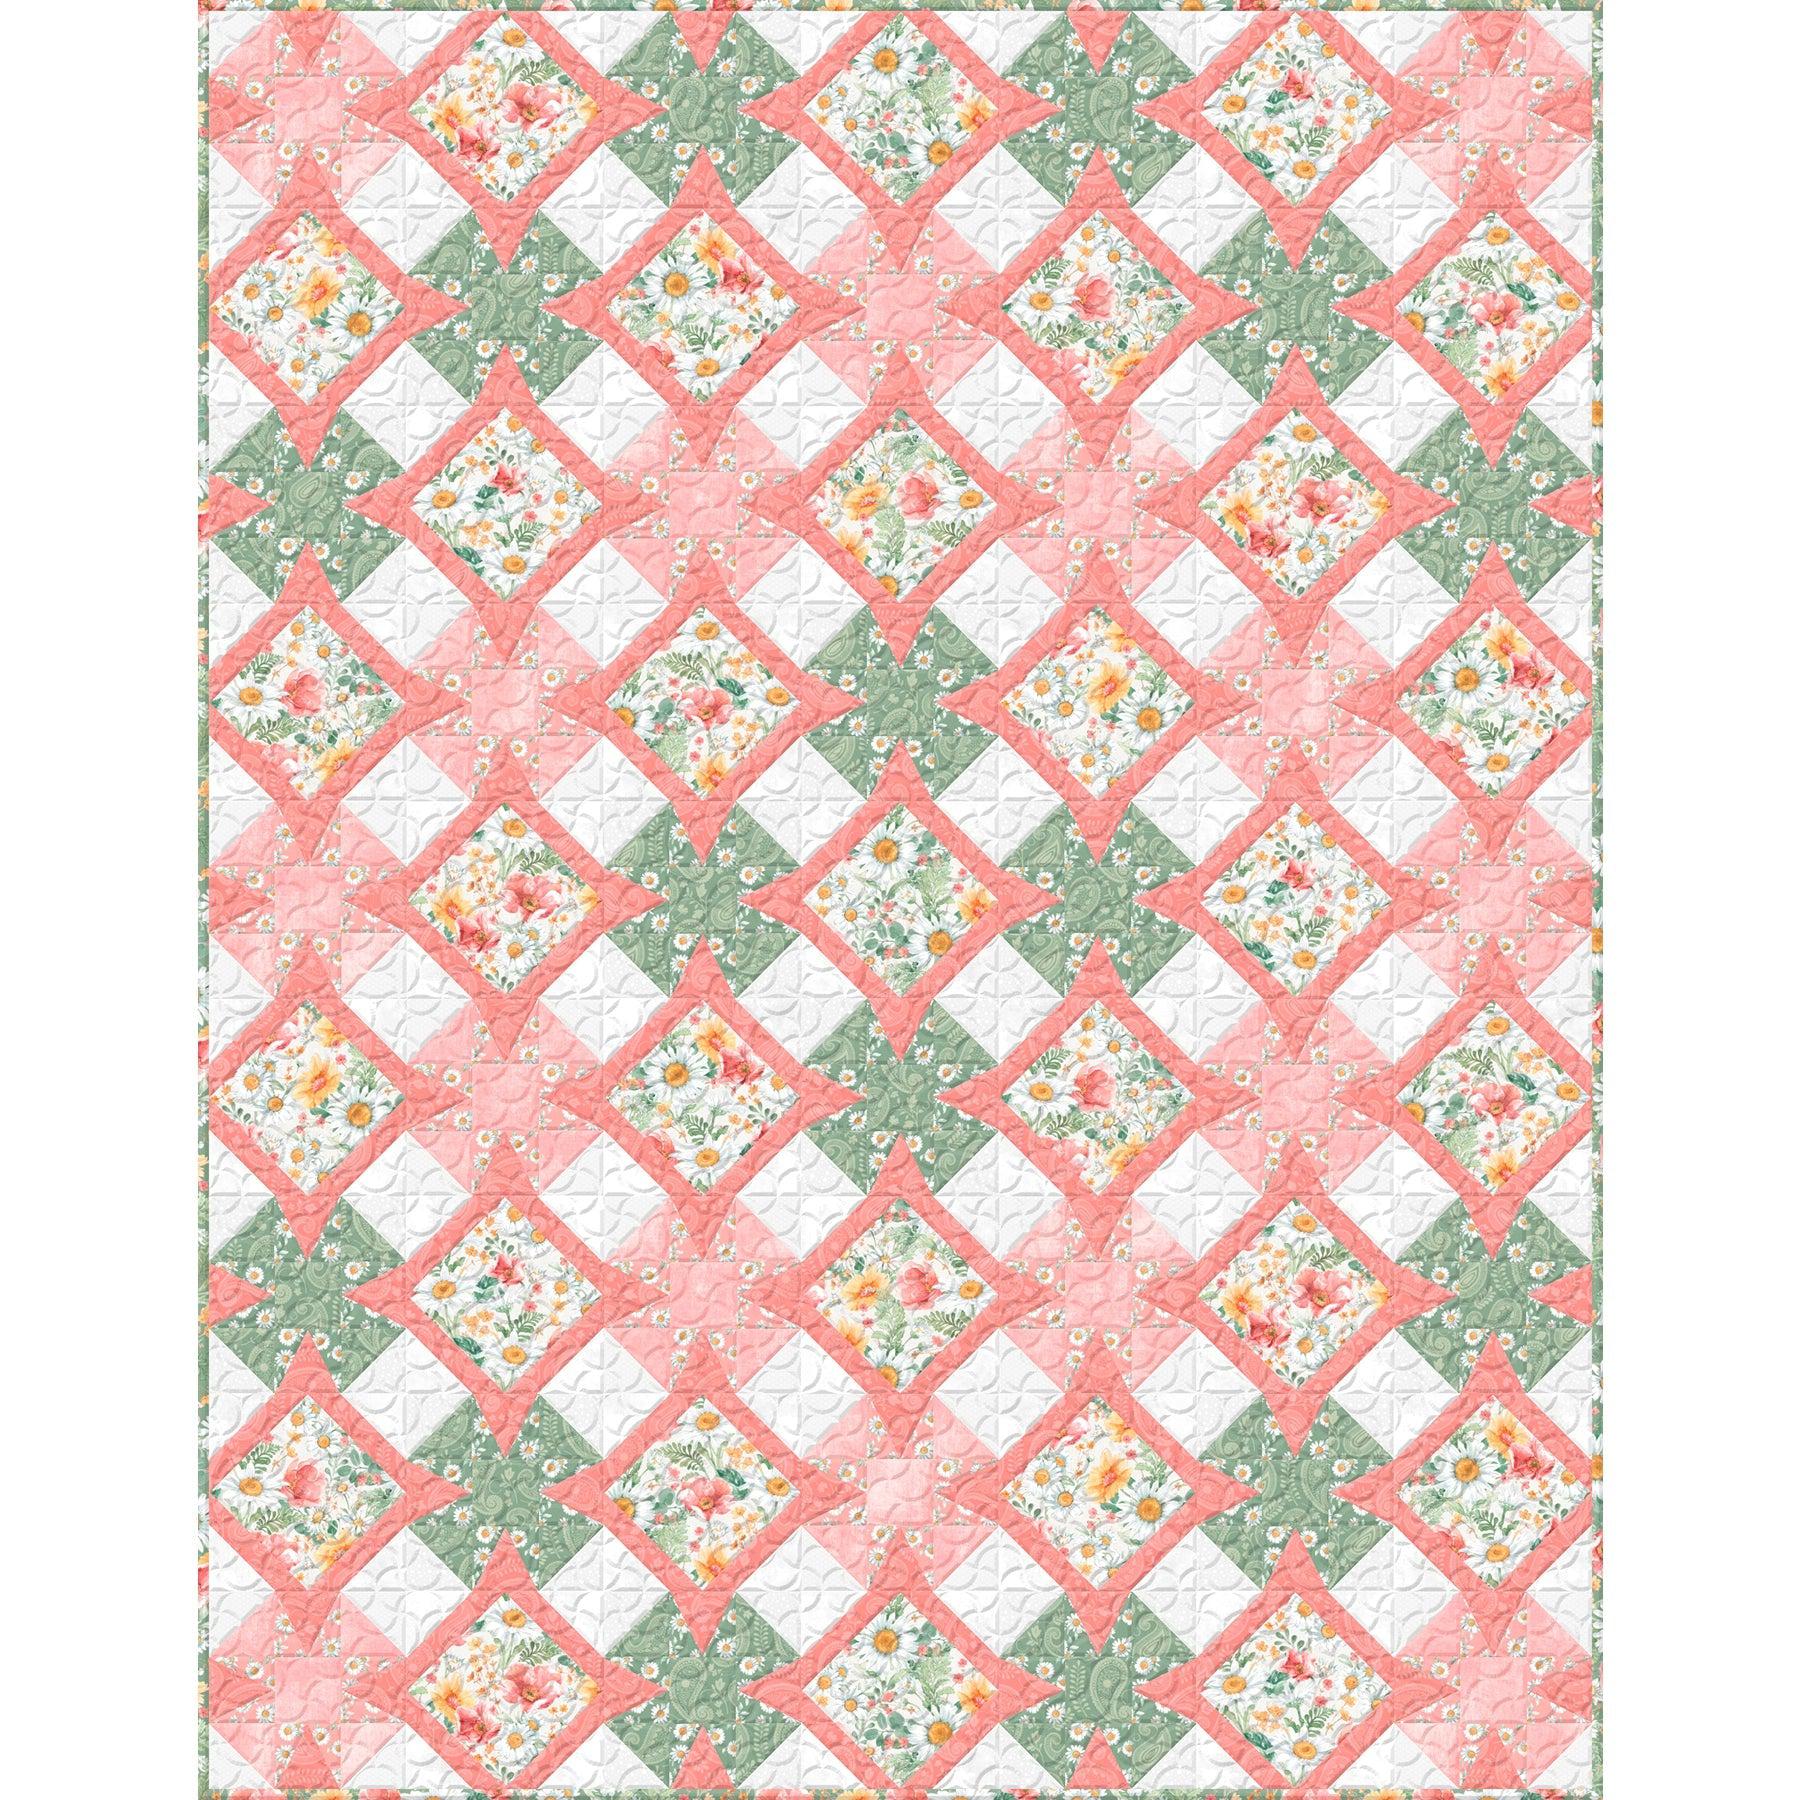 Basic Twin Quilt #7 - Free Digital Download